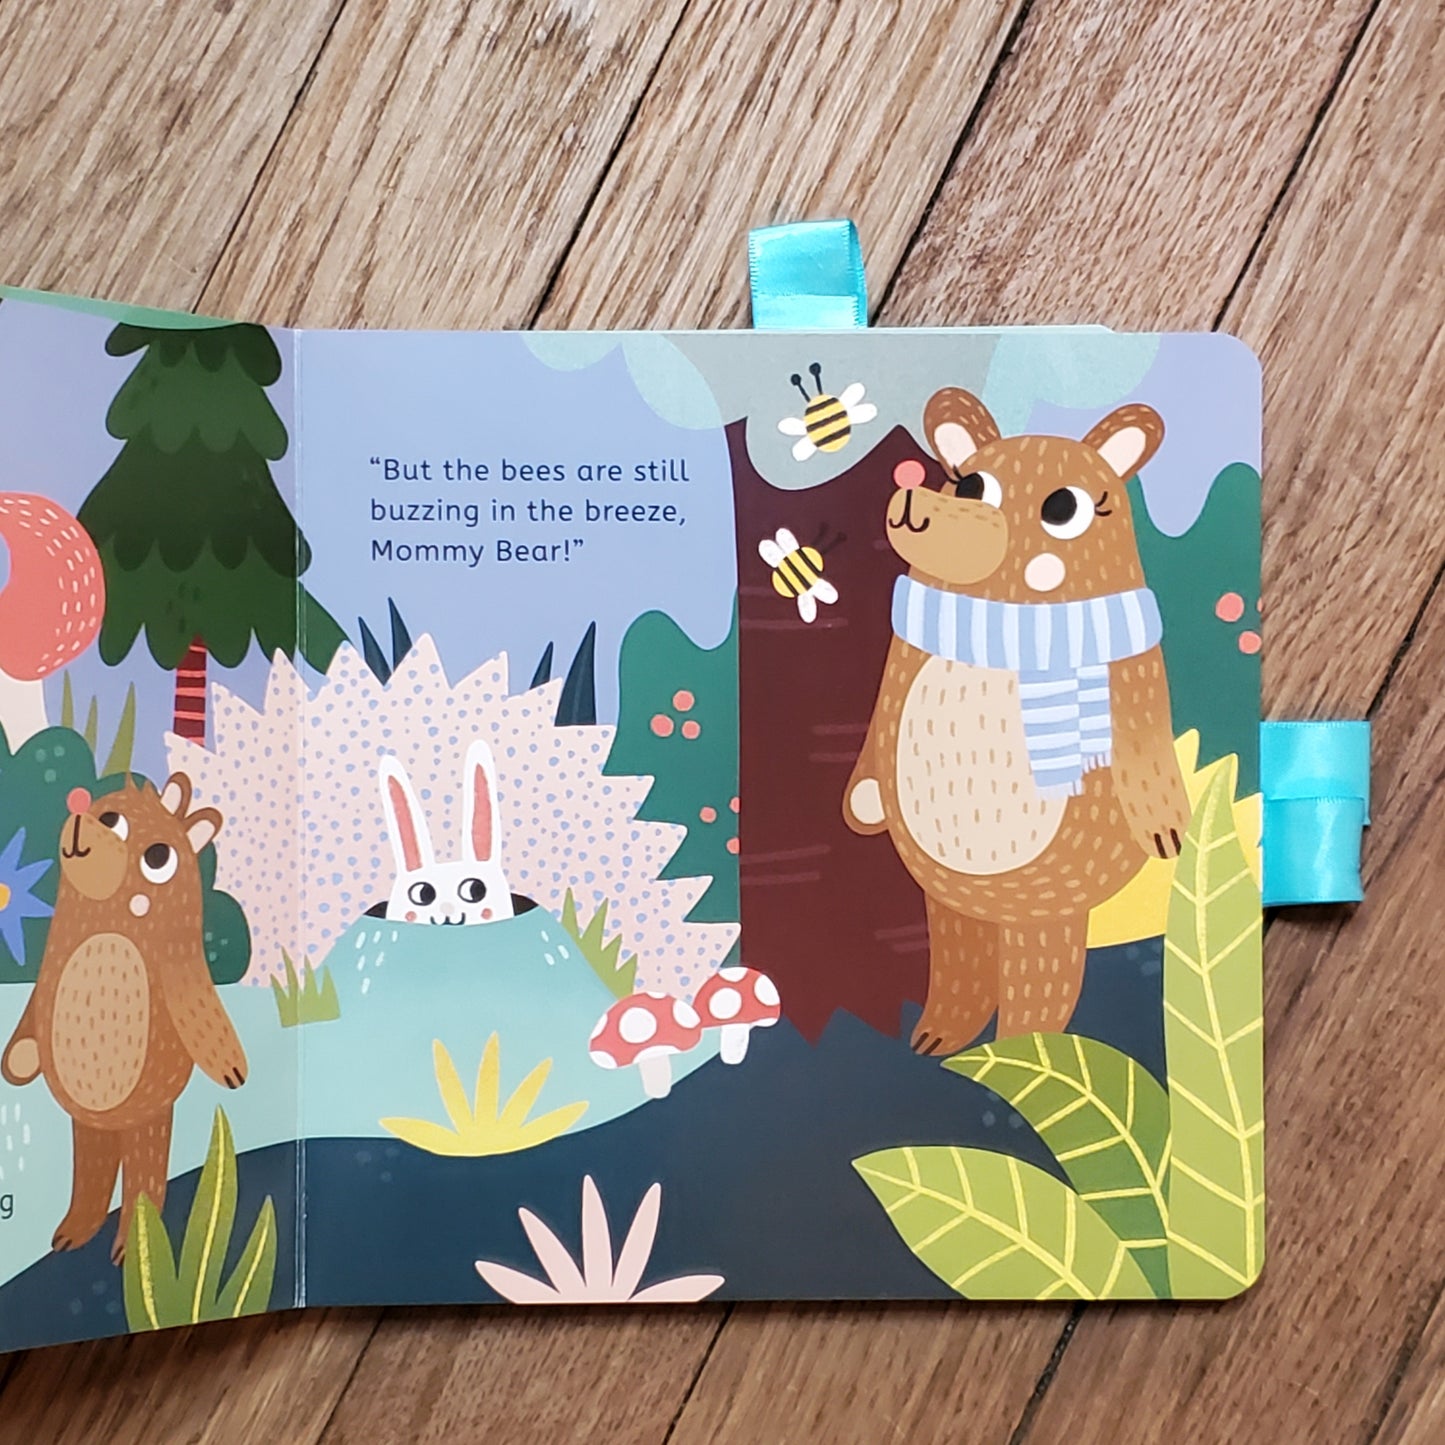 Board Book - Bedtime, Little Bear: Pull the Ribbons to Explore the Story